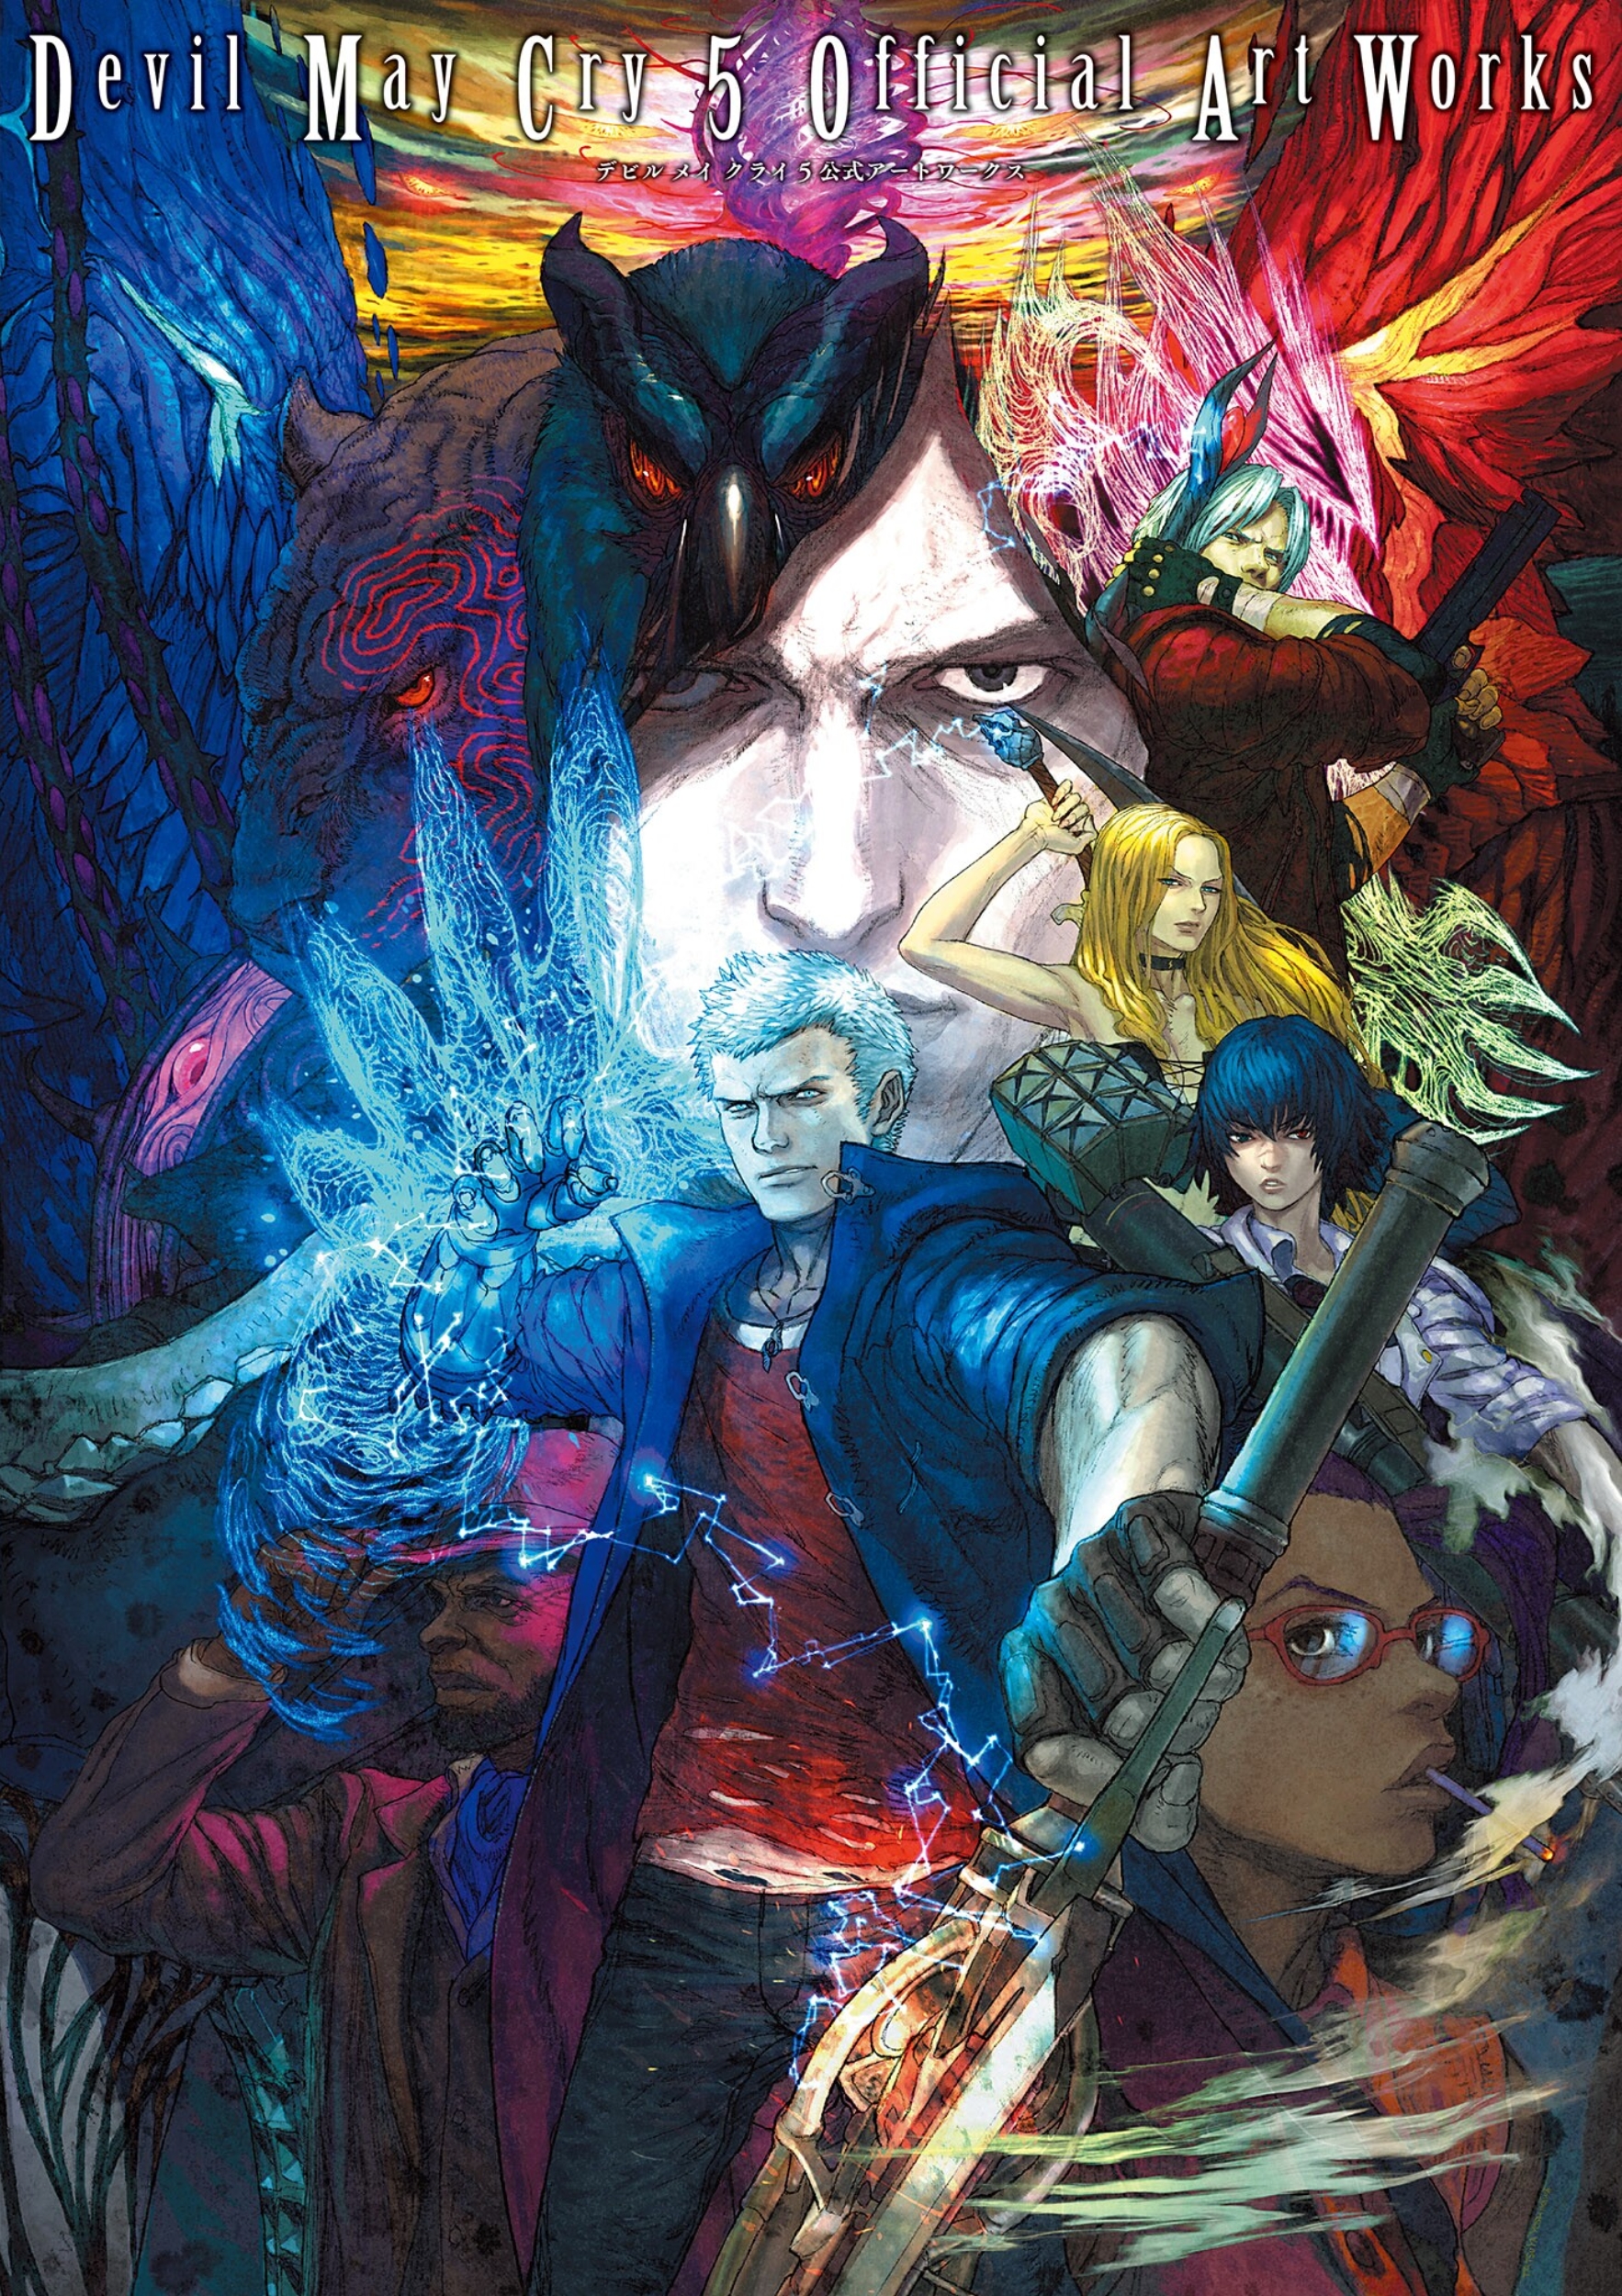 Devil May Cry 5 Official Art Works | Devil May Cry Wiki | Fandom